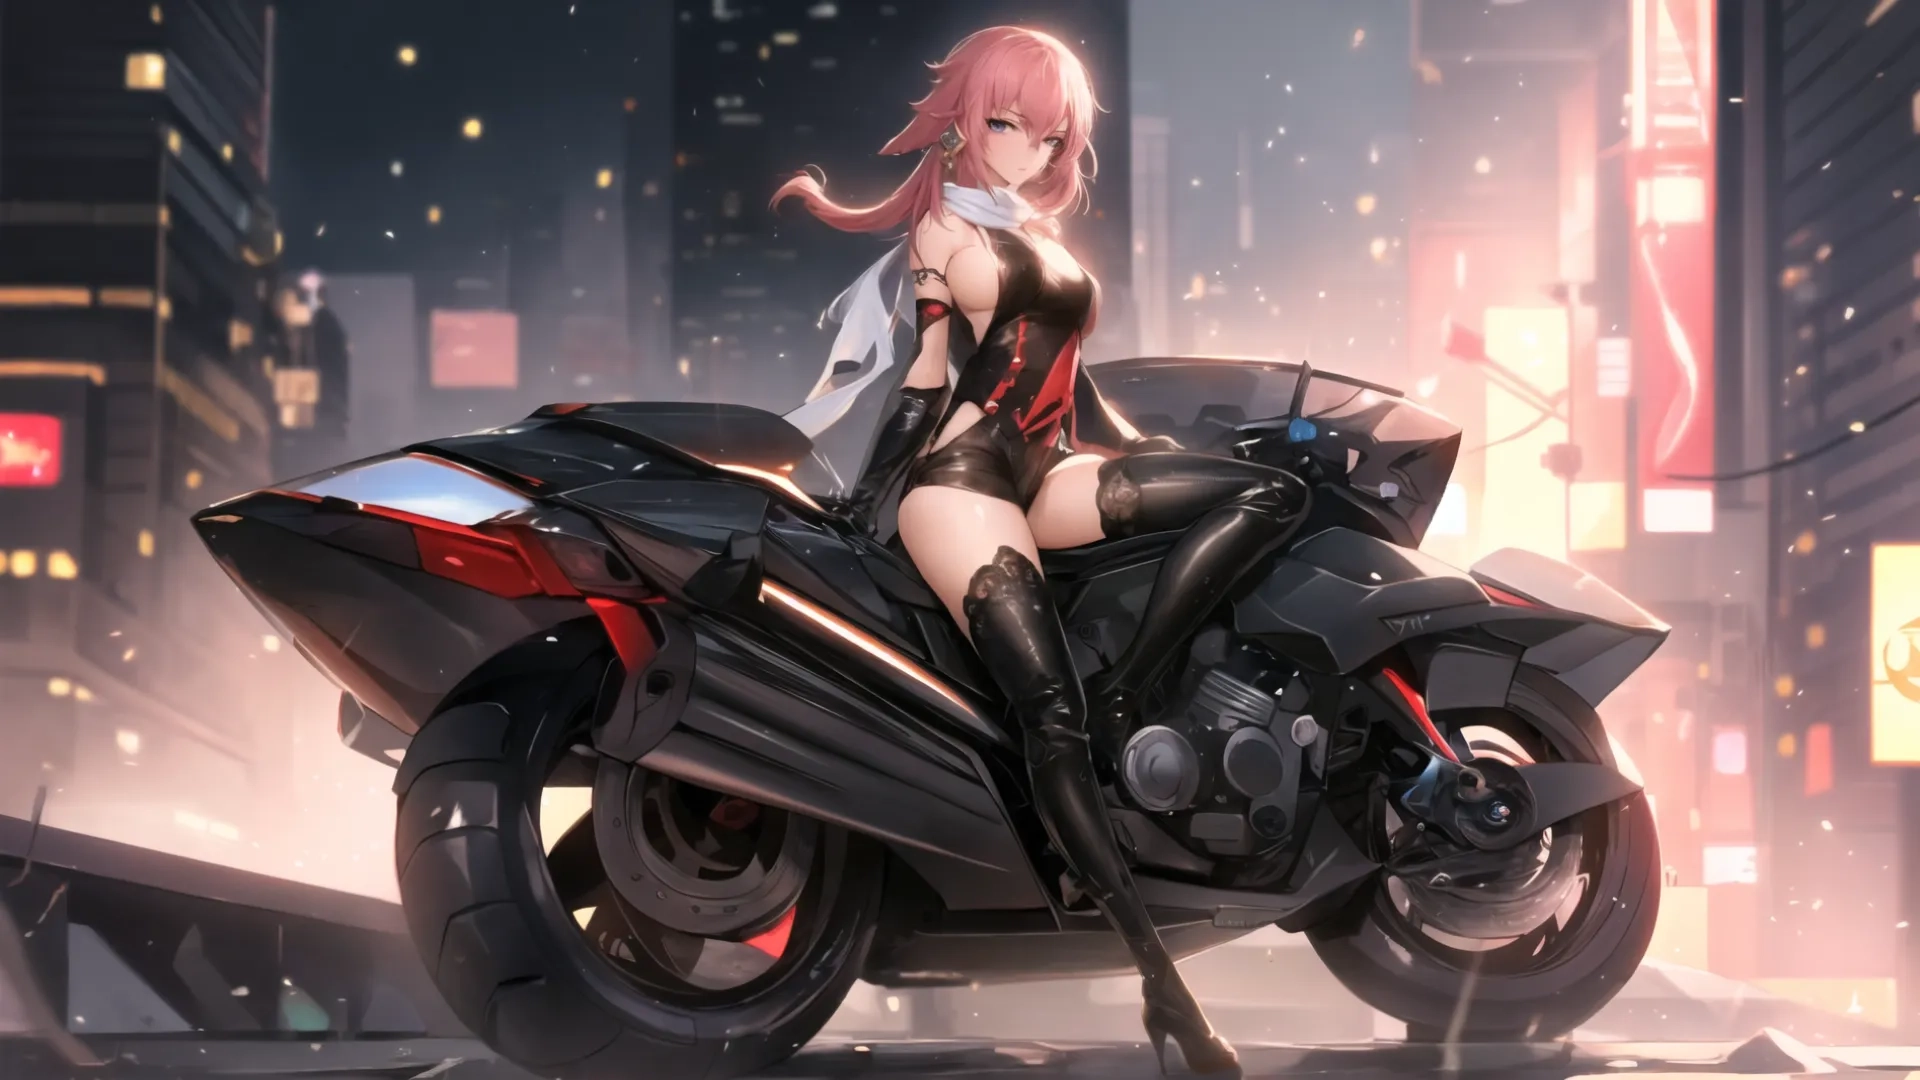 an anime character sits on top of a modern motorcycle in a city at night time, with skyscrapers in the background - some of red lights appear dark
